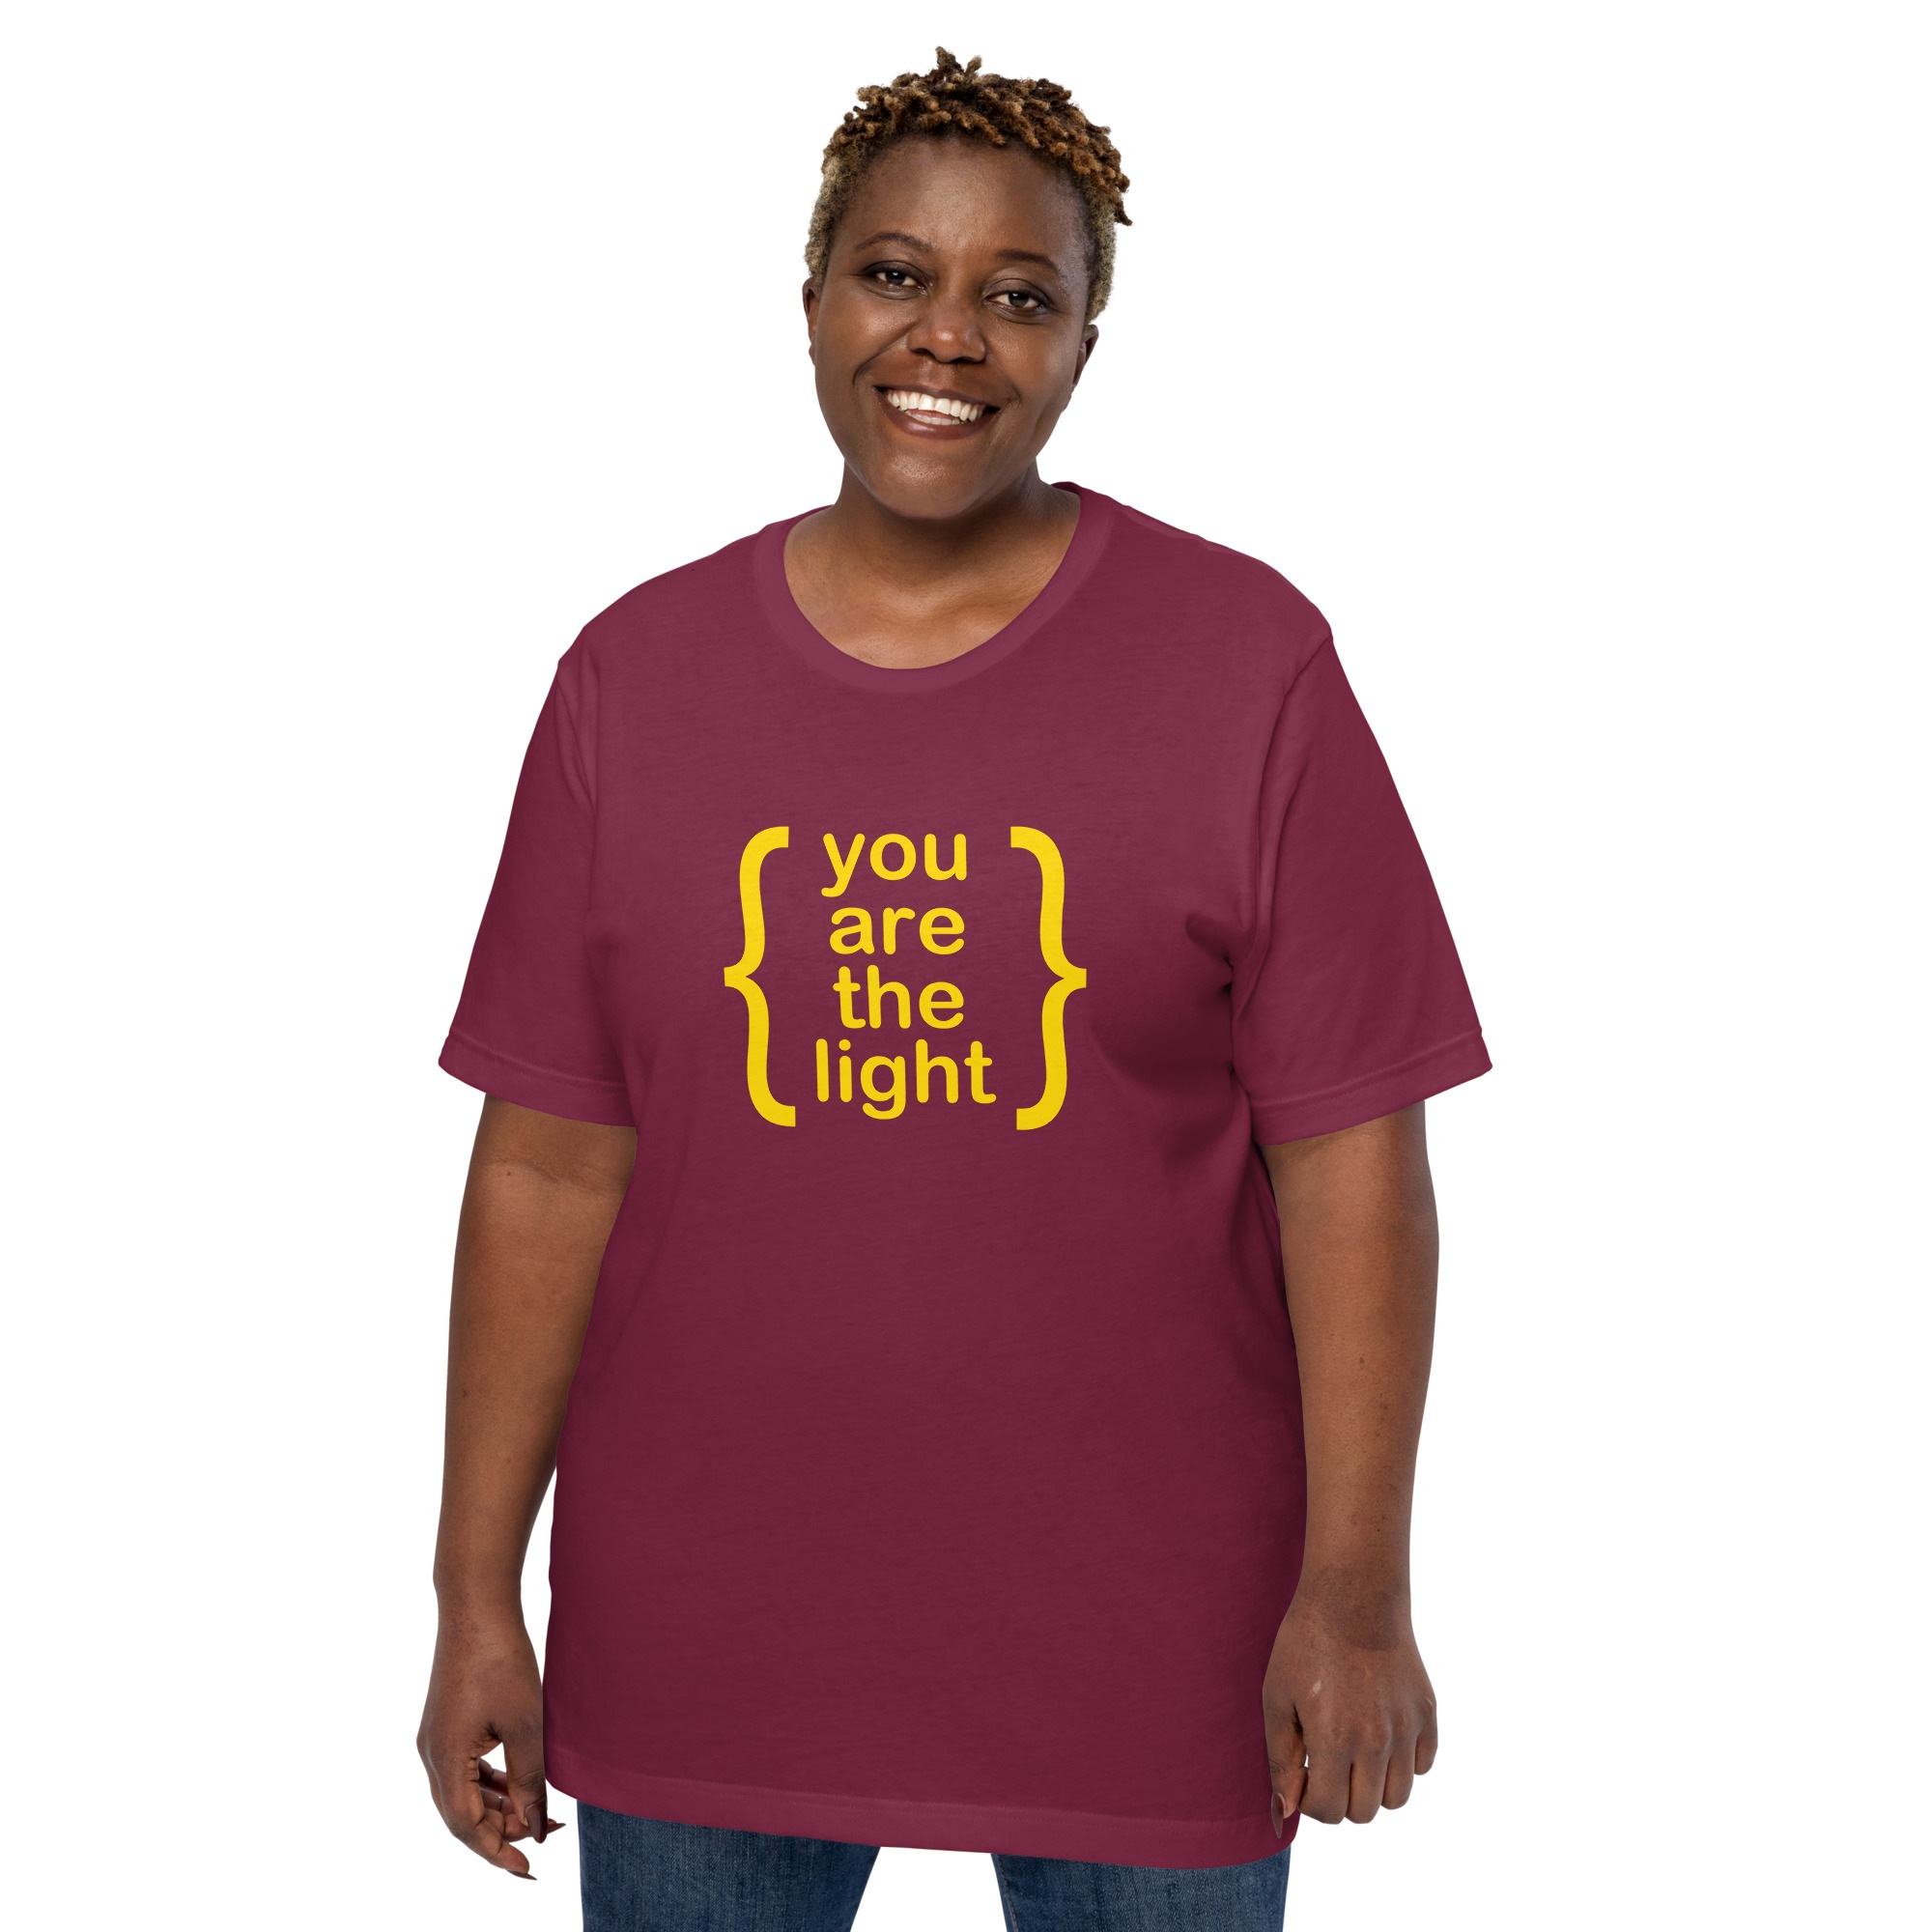 You Are The Light Tshirt